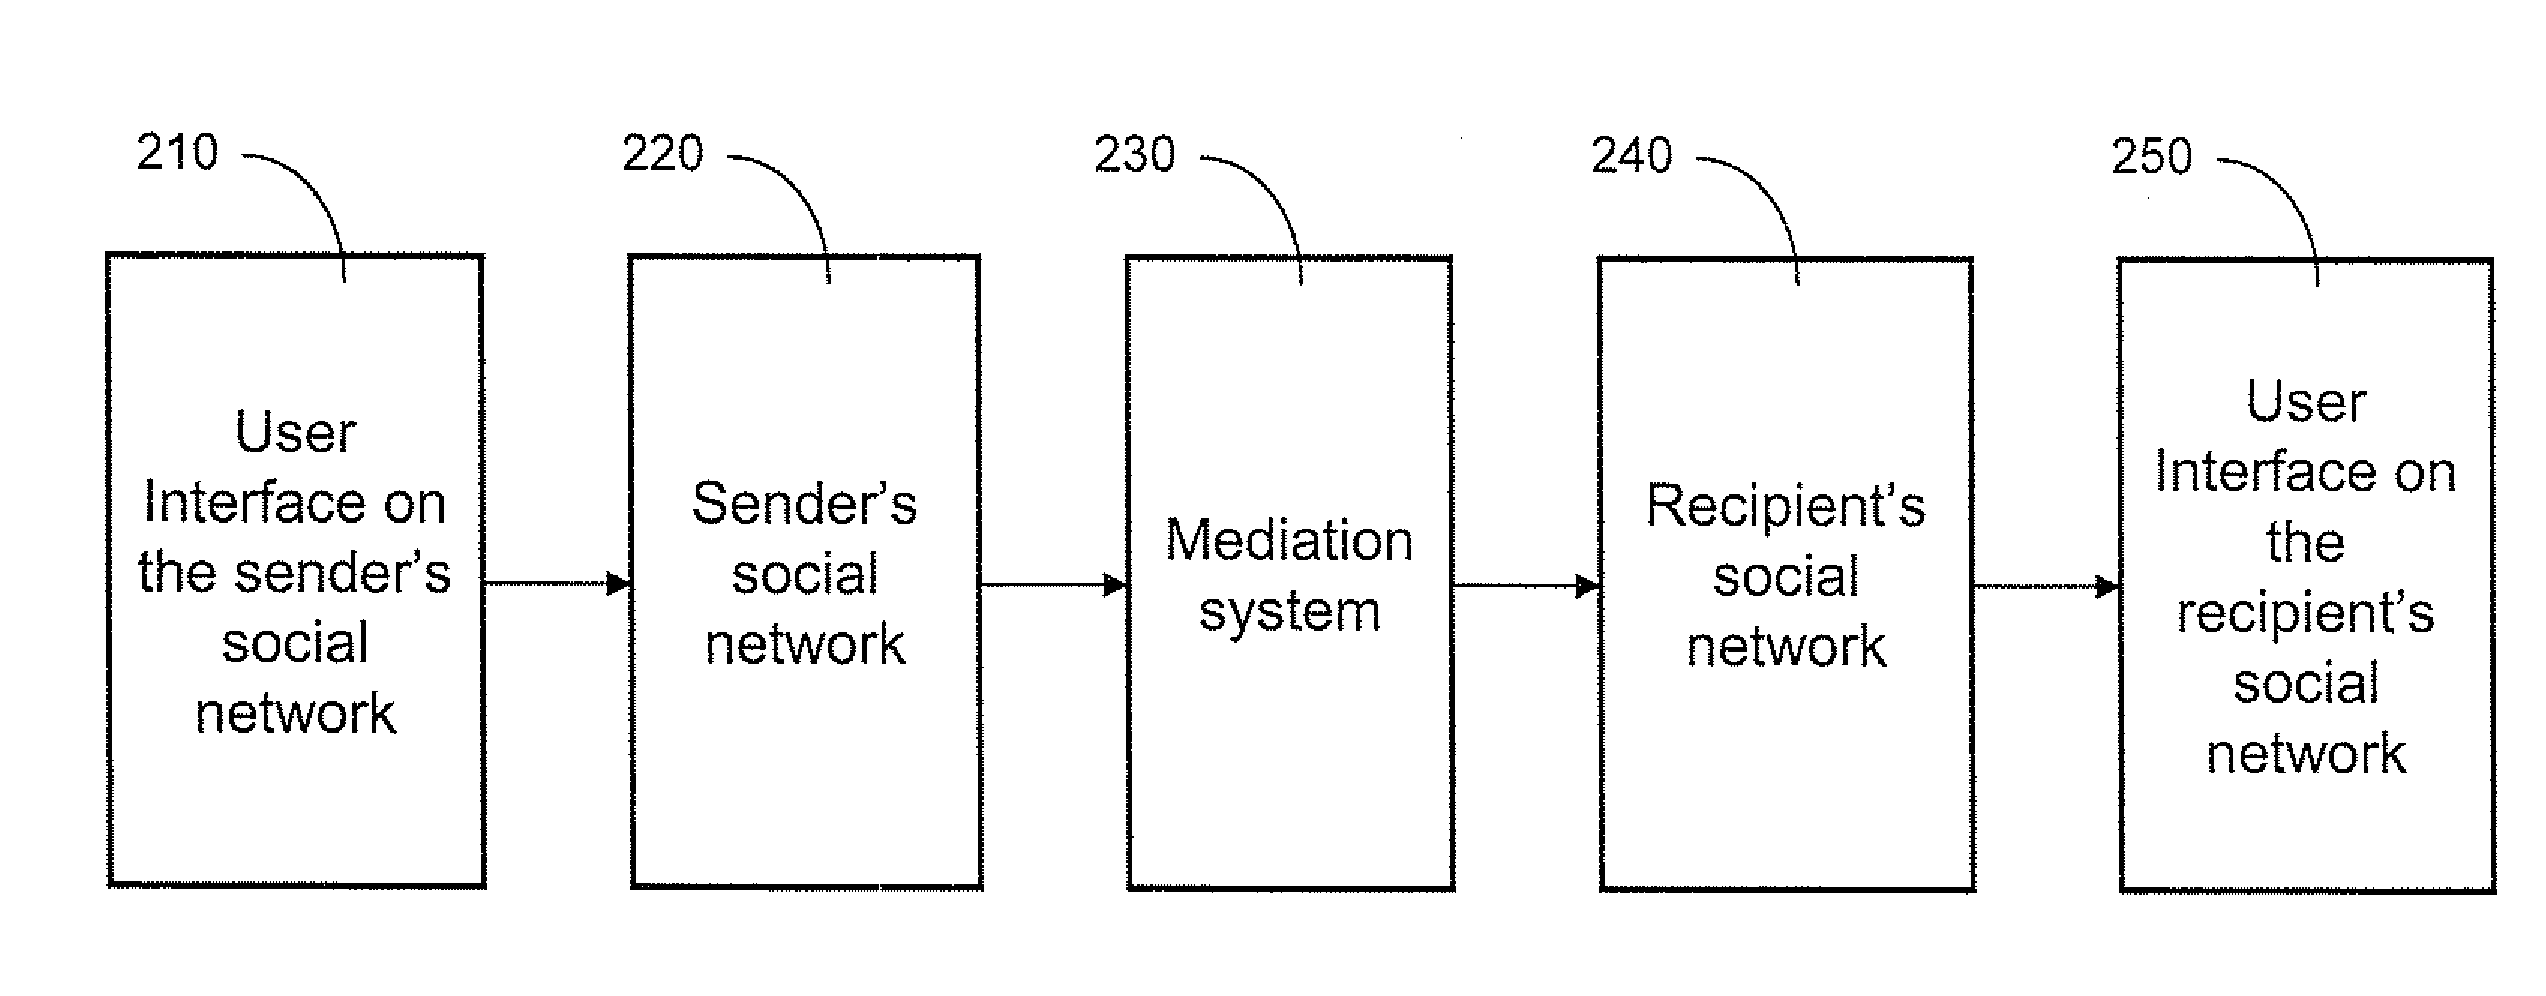 Method and apparatus for enabling messaging between users of different social networks and between users of social networks and users of other communication systems